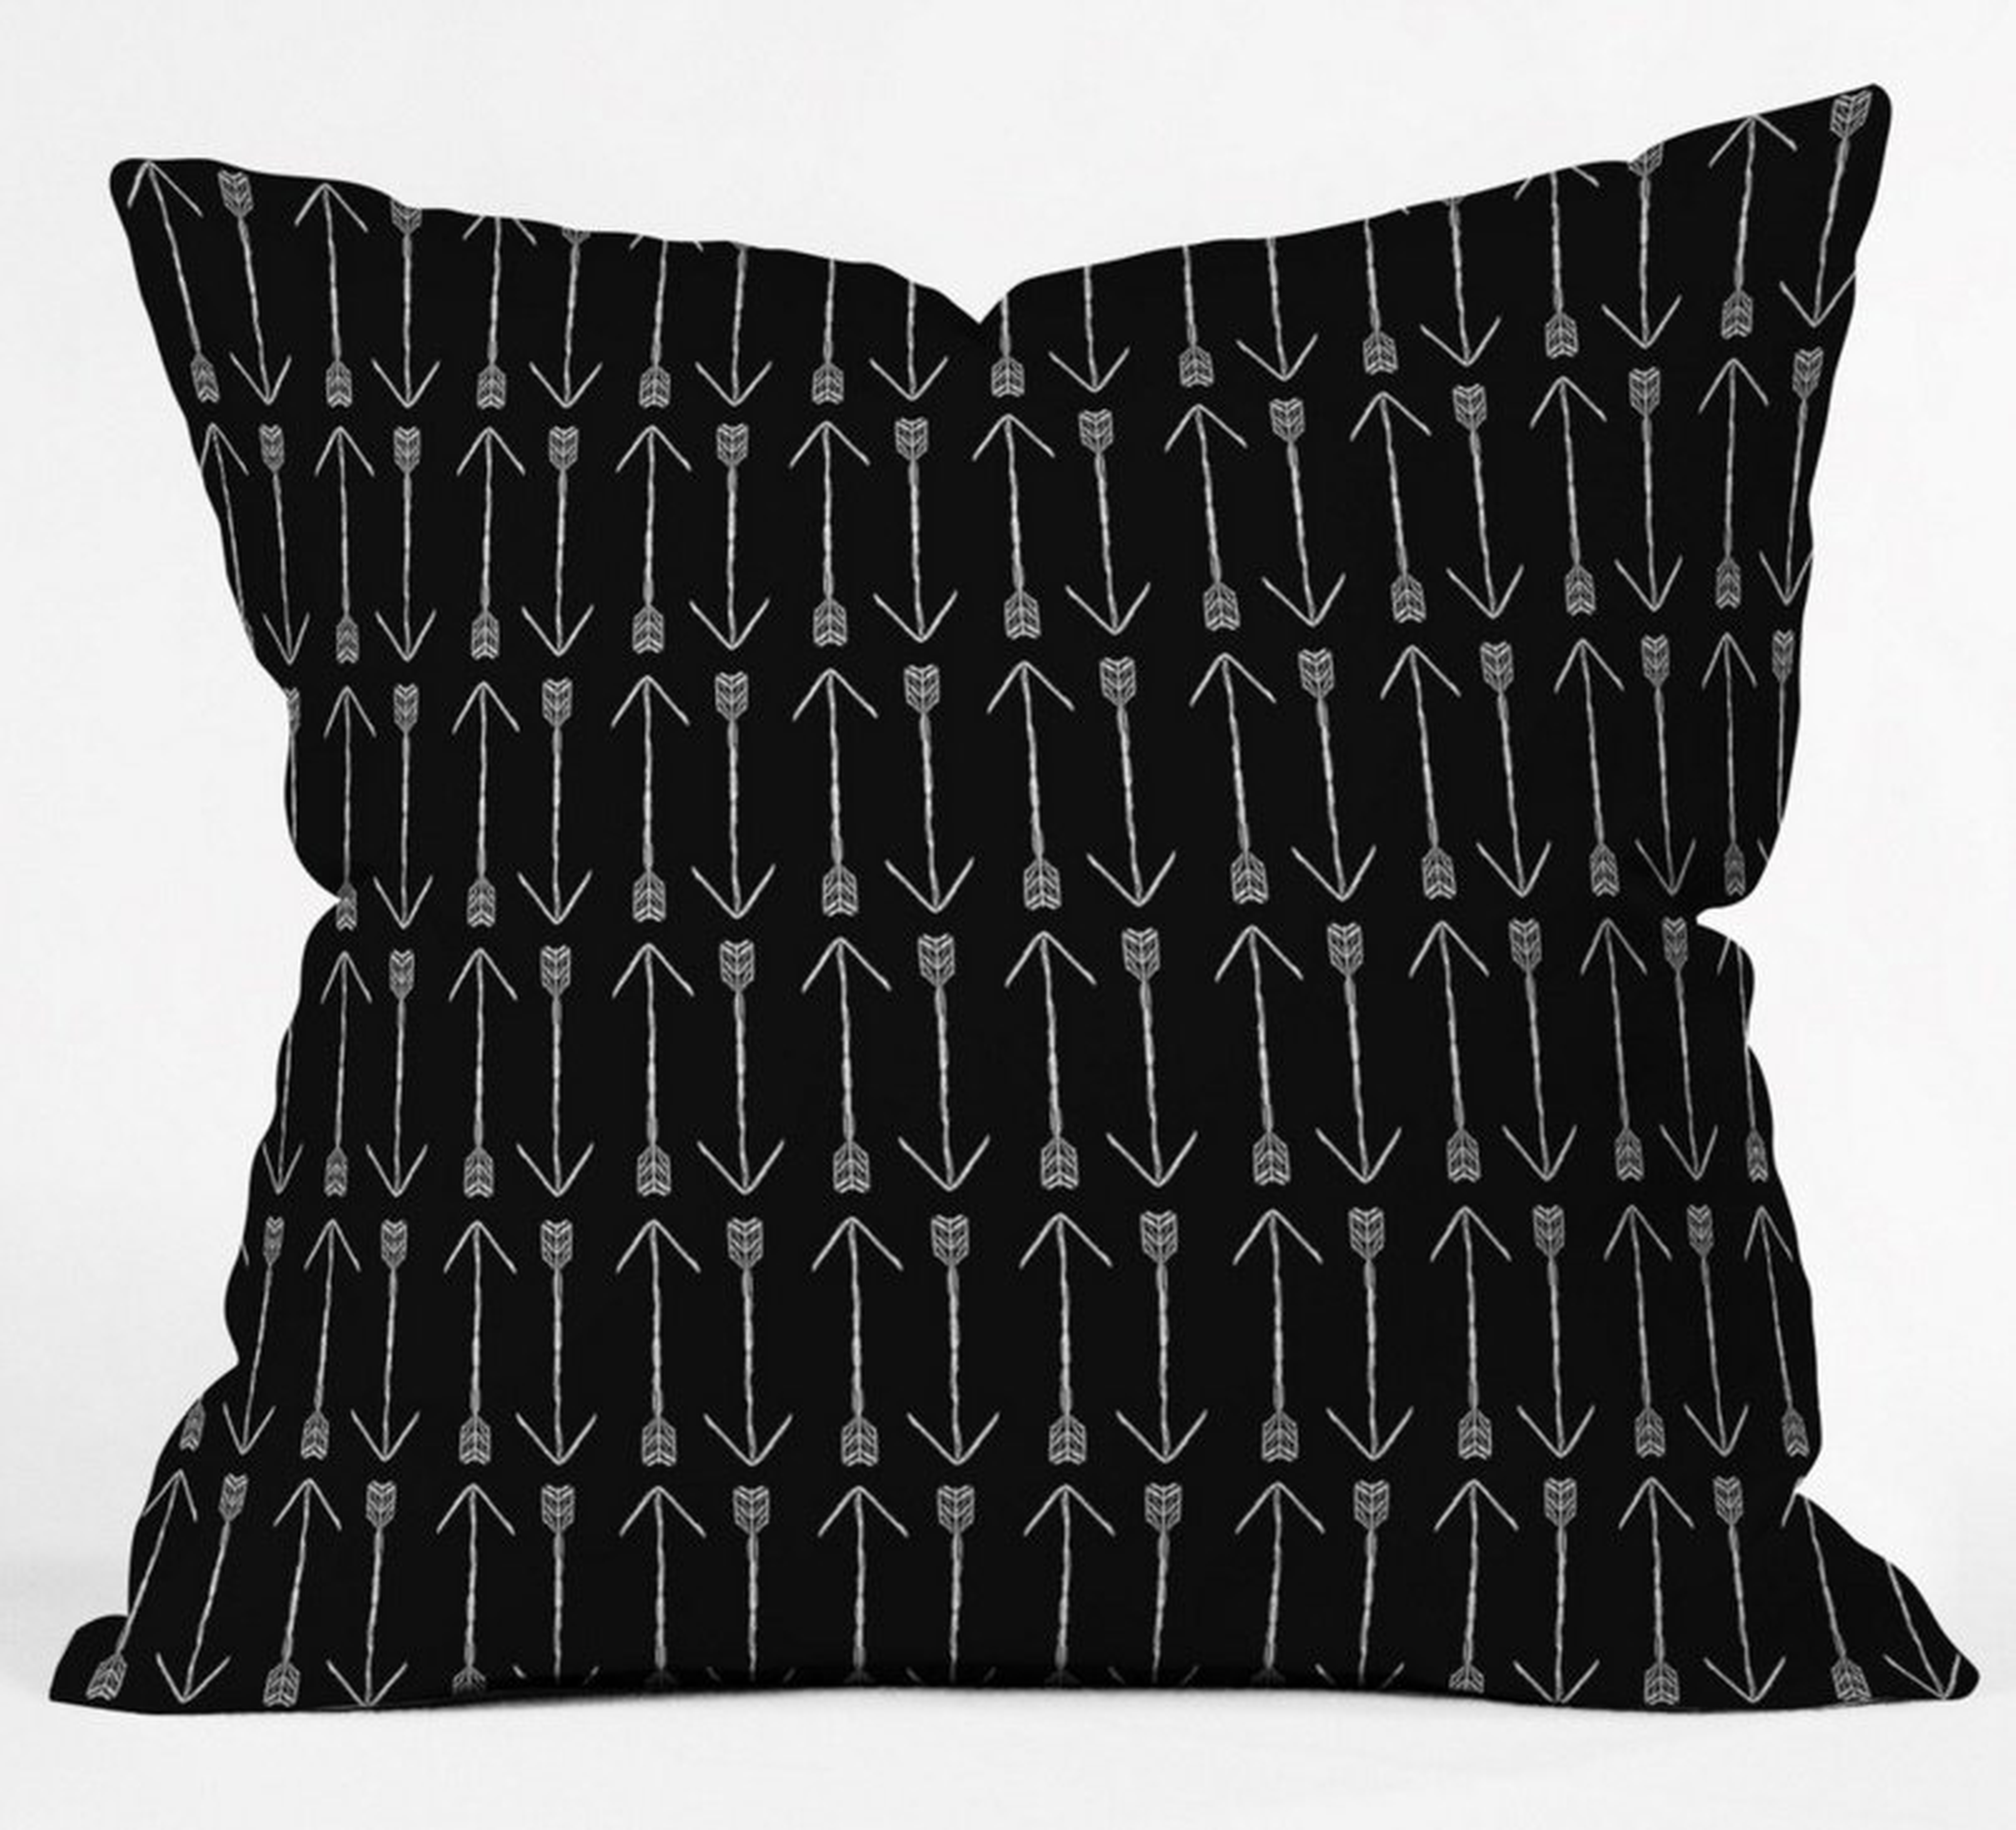 Black Arrows Throw Pillow 16"x16" Cover with Insert - Wander Print Co.